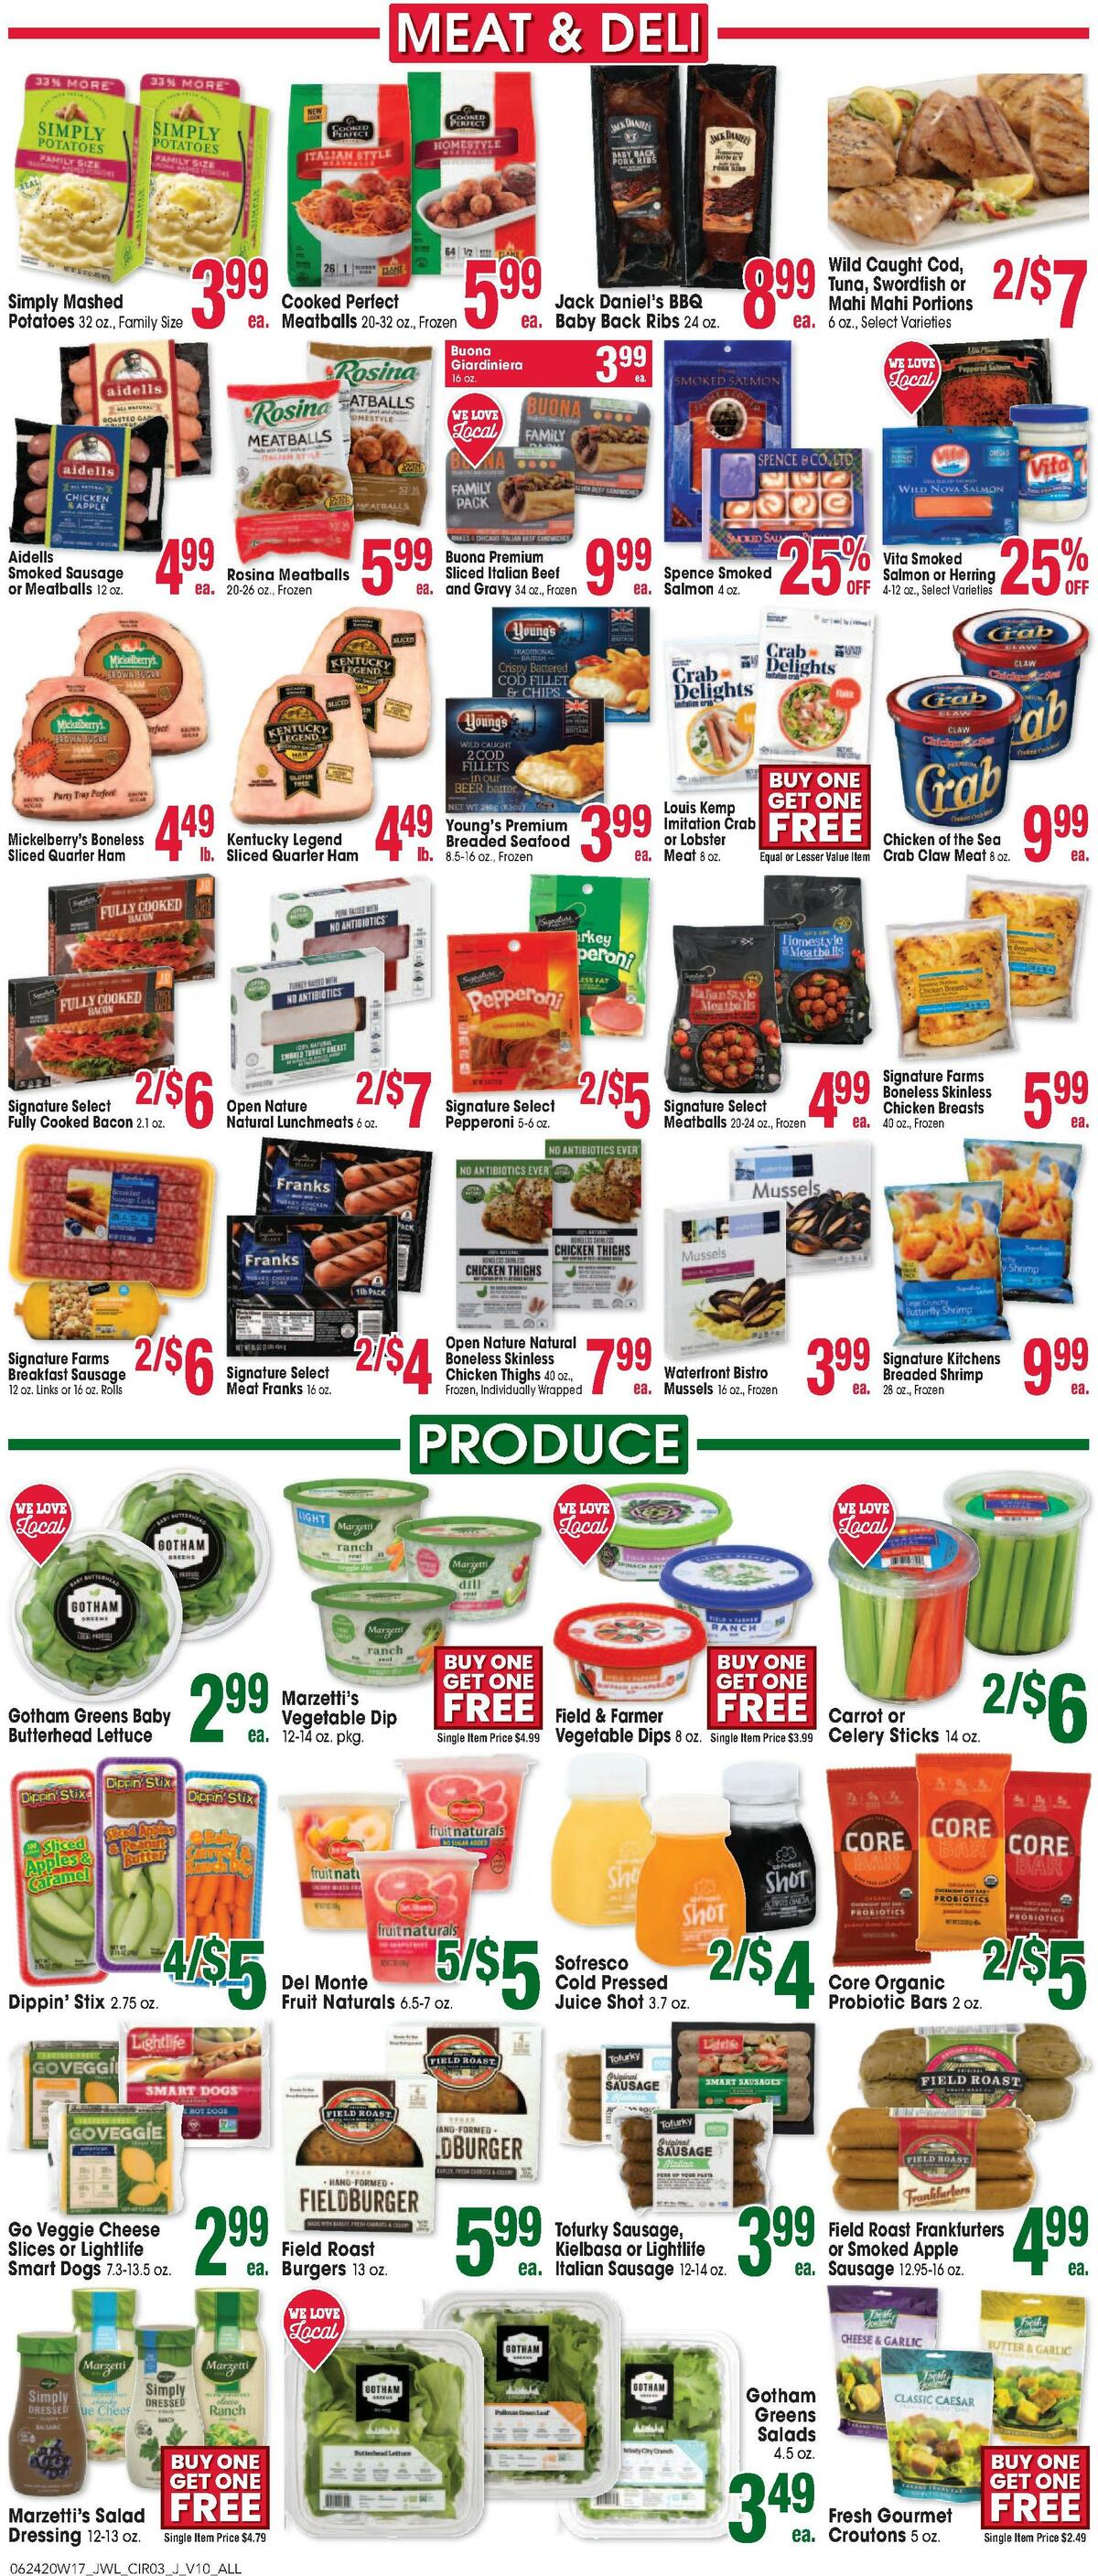 Jewel Osco Weekly Ad from June 24